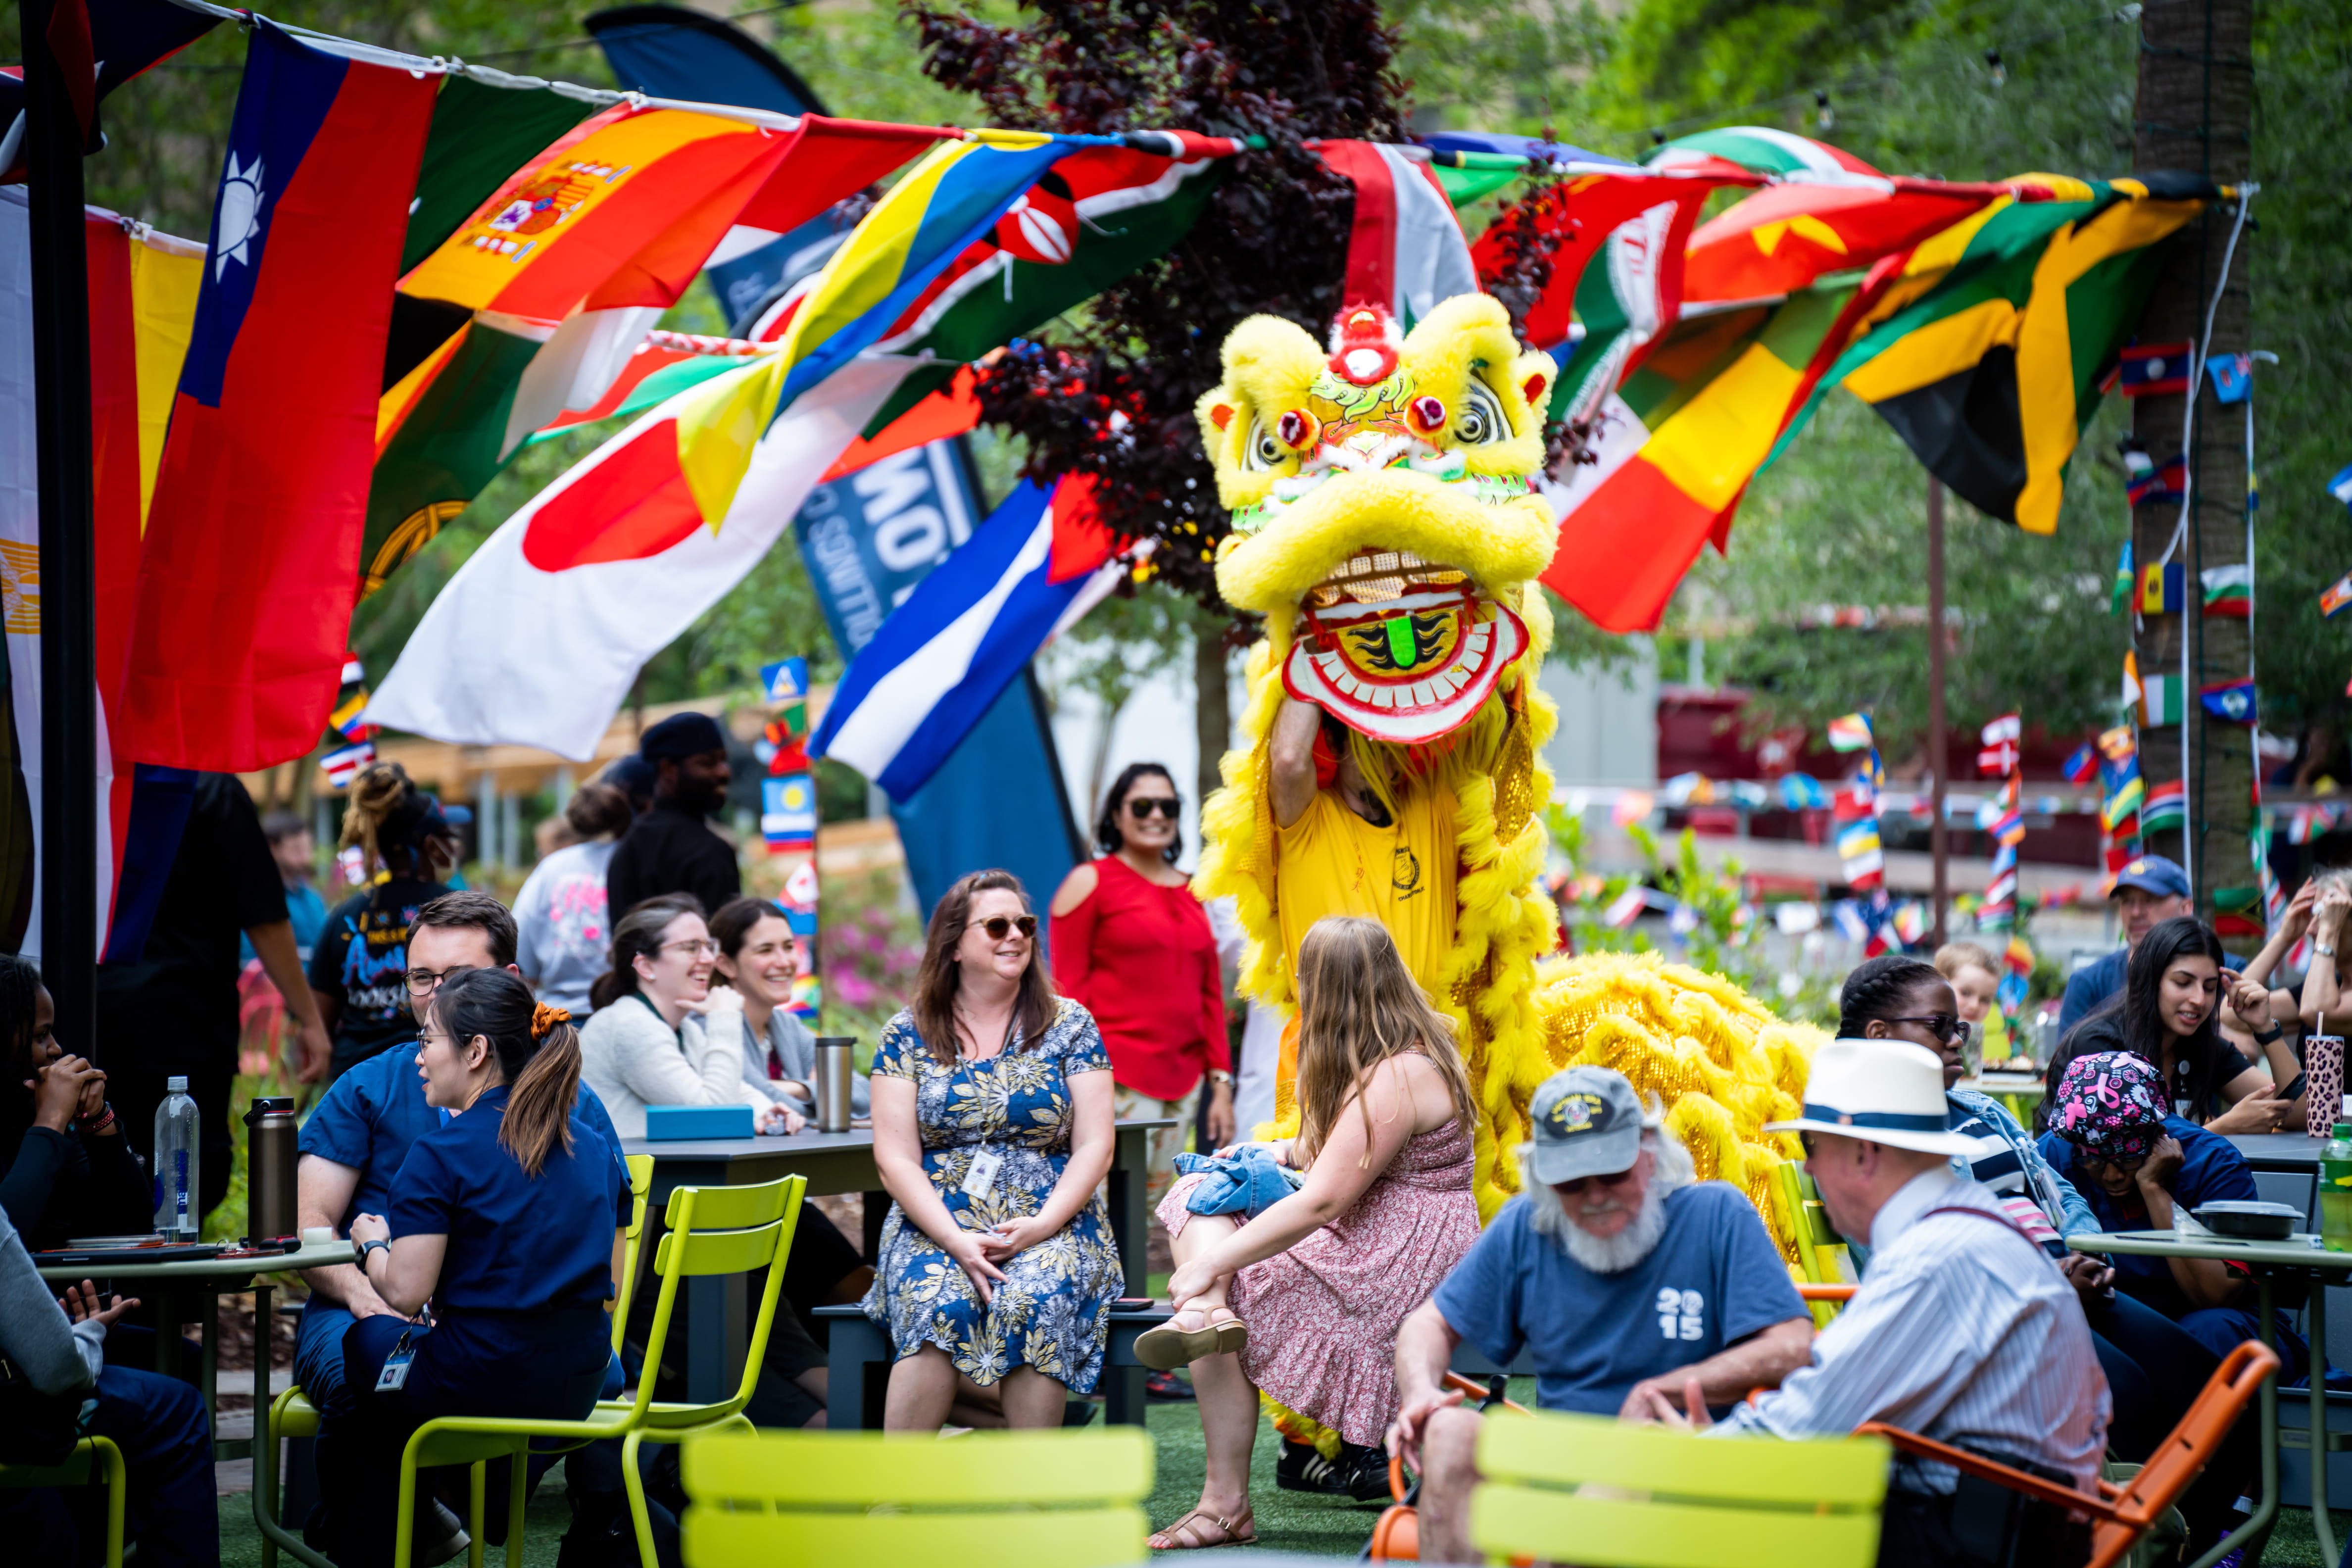 A performer in a Dragon suit performs a traditional Chinese dance at the International Bazaar.